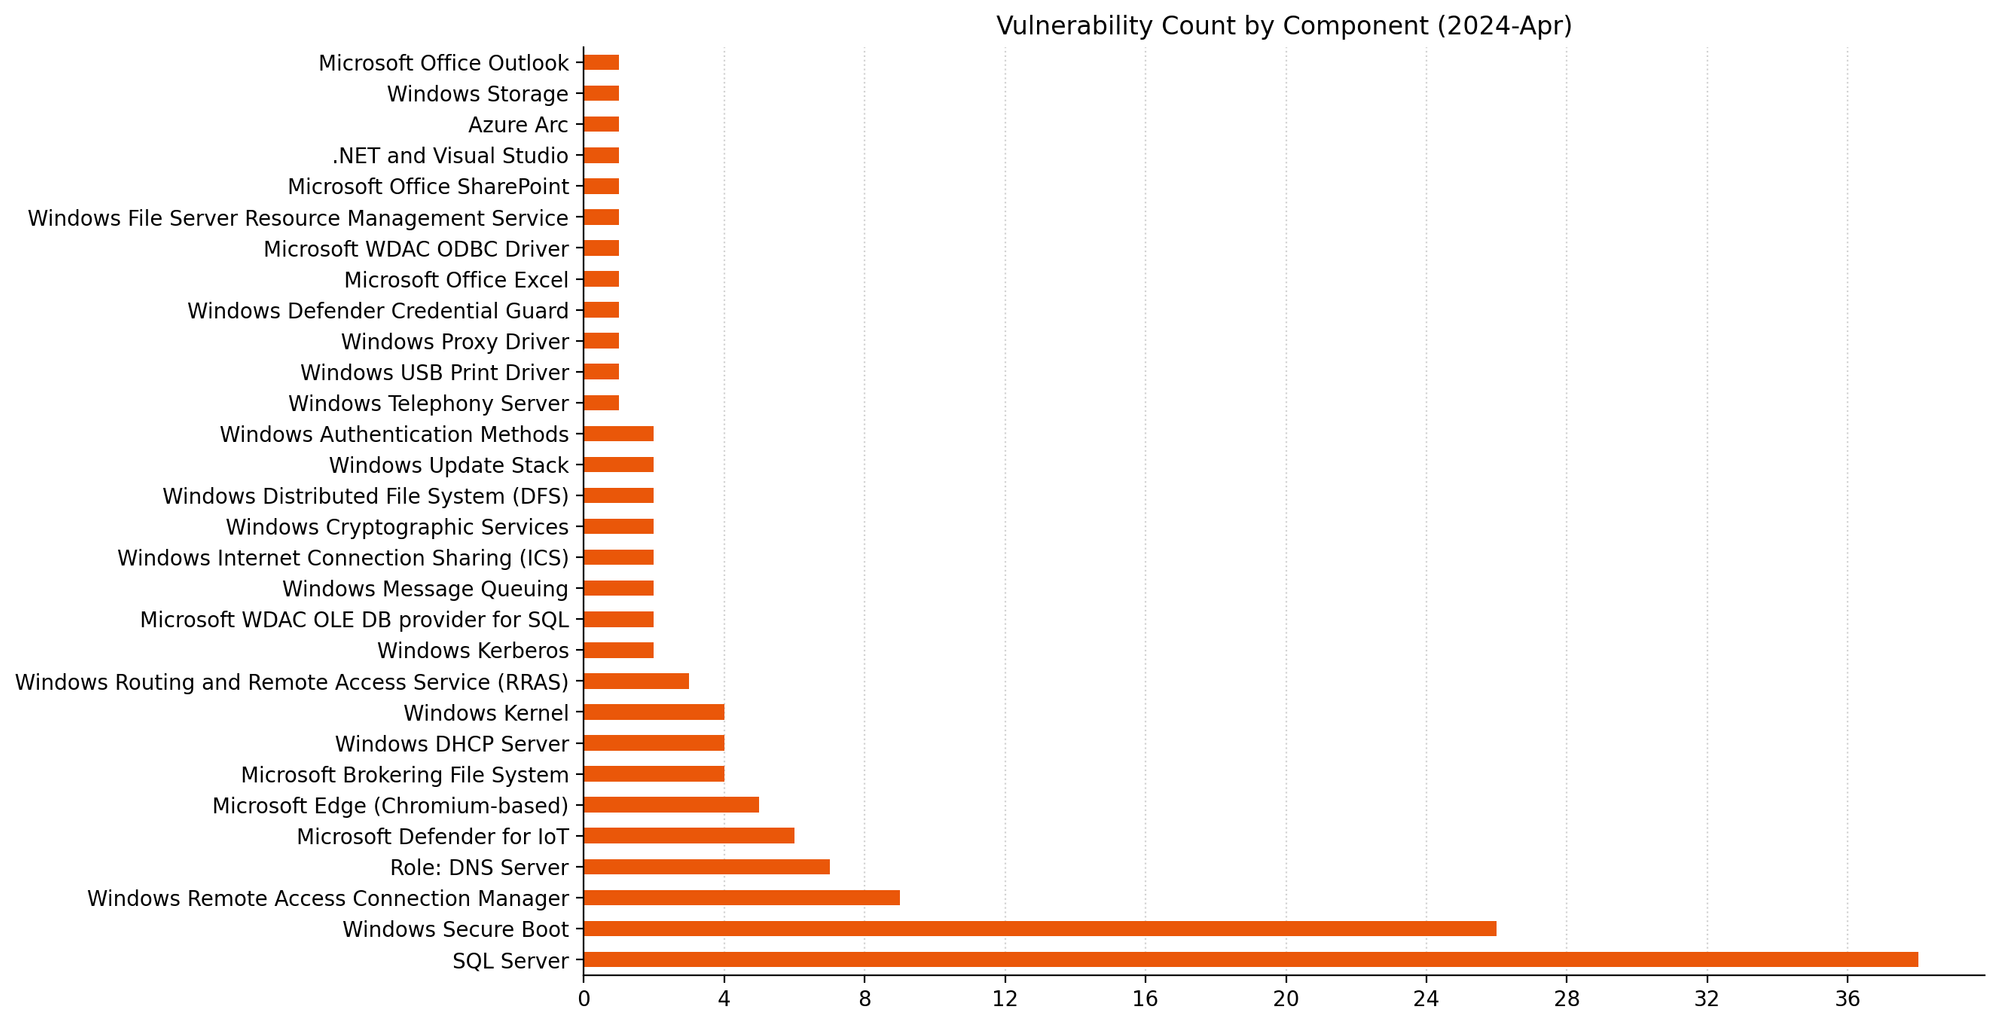 A bar chart showing the distribution of vulnerabilities by affected component for Microsoft Patch Tuesday April 2024.